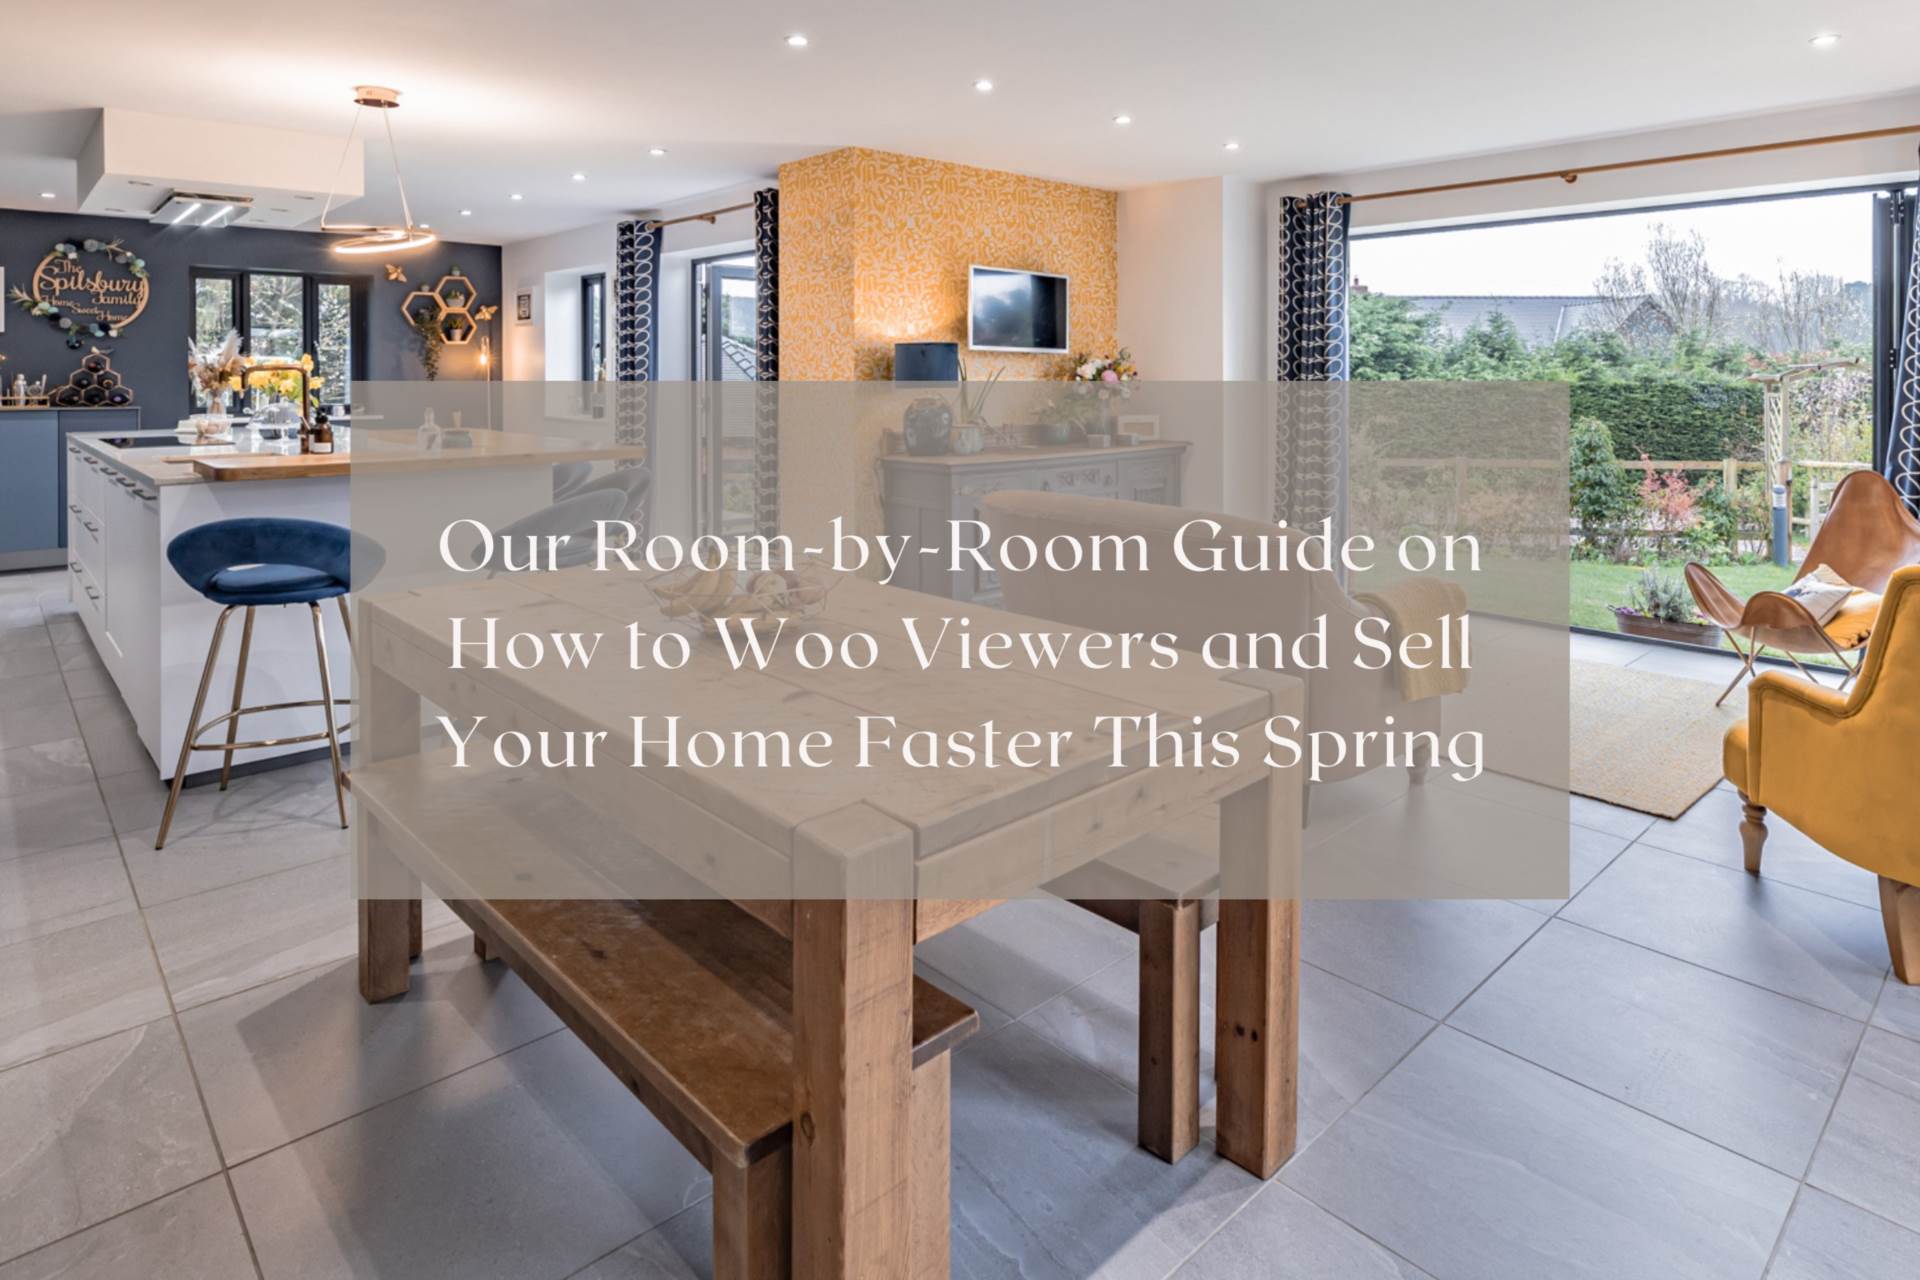 How to turn viewers into buyers